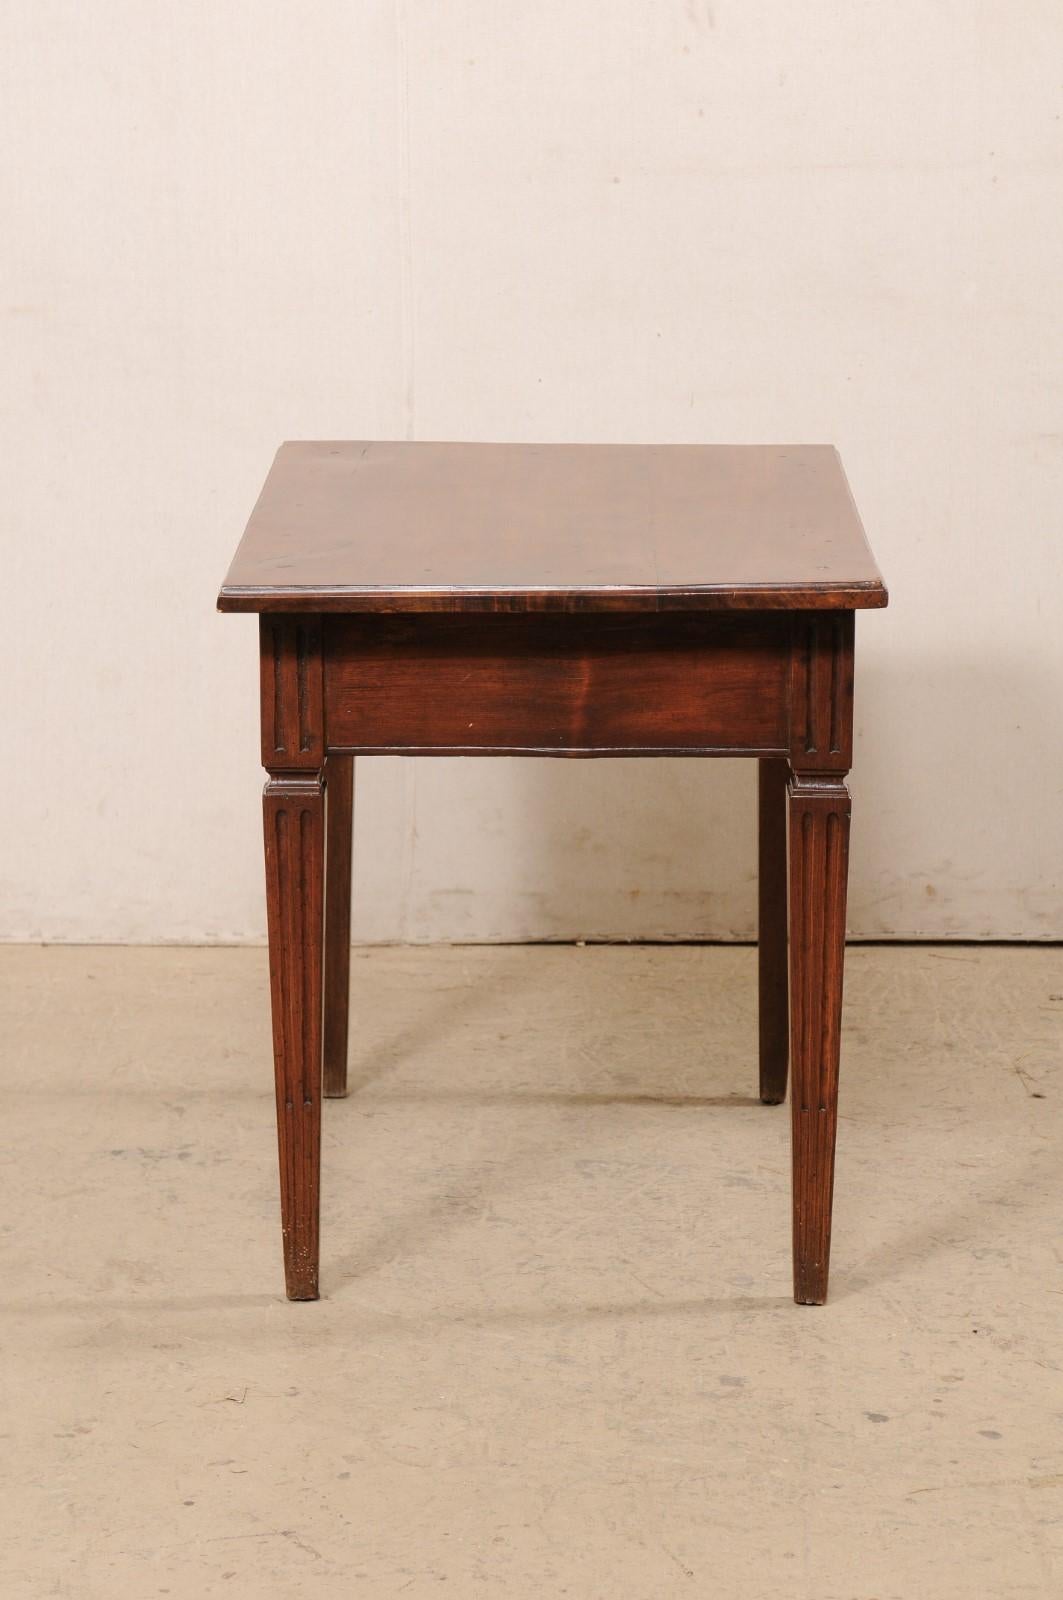 19th Century Italian Small Wooden Table w/Drawer Presented on Flute-Carved Legs, 19th C. For Sale